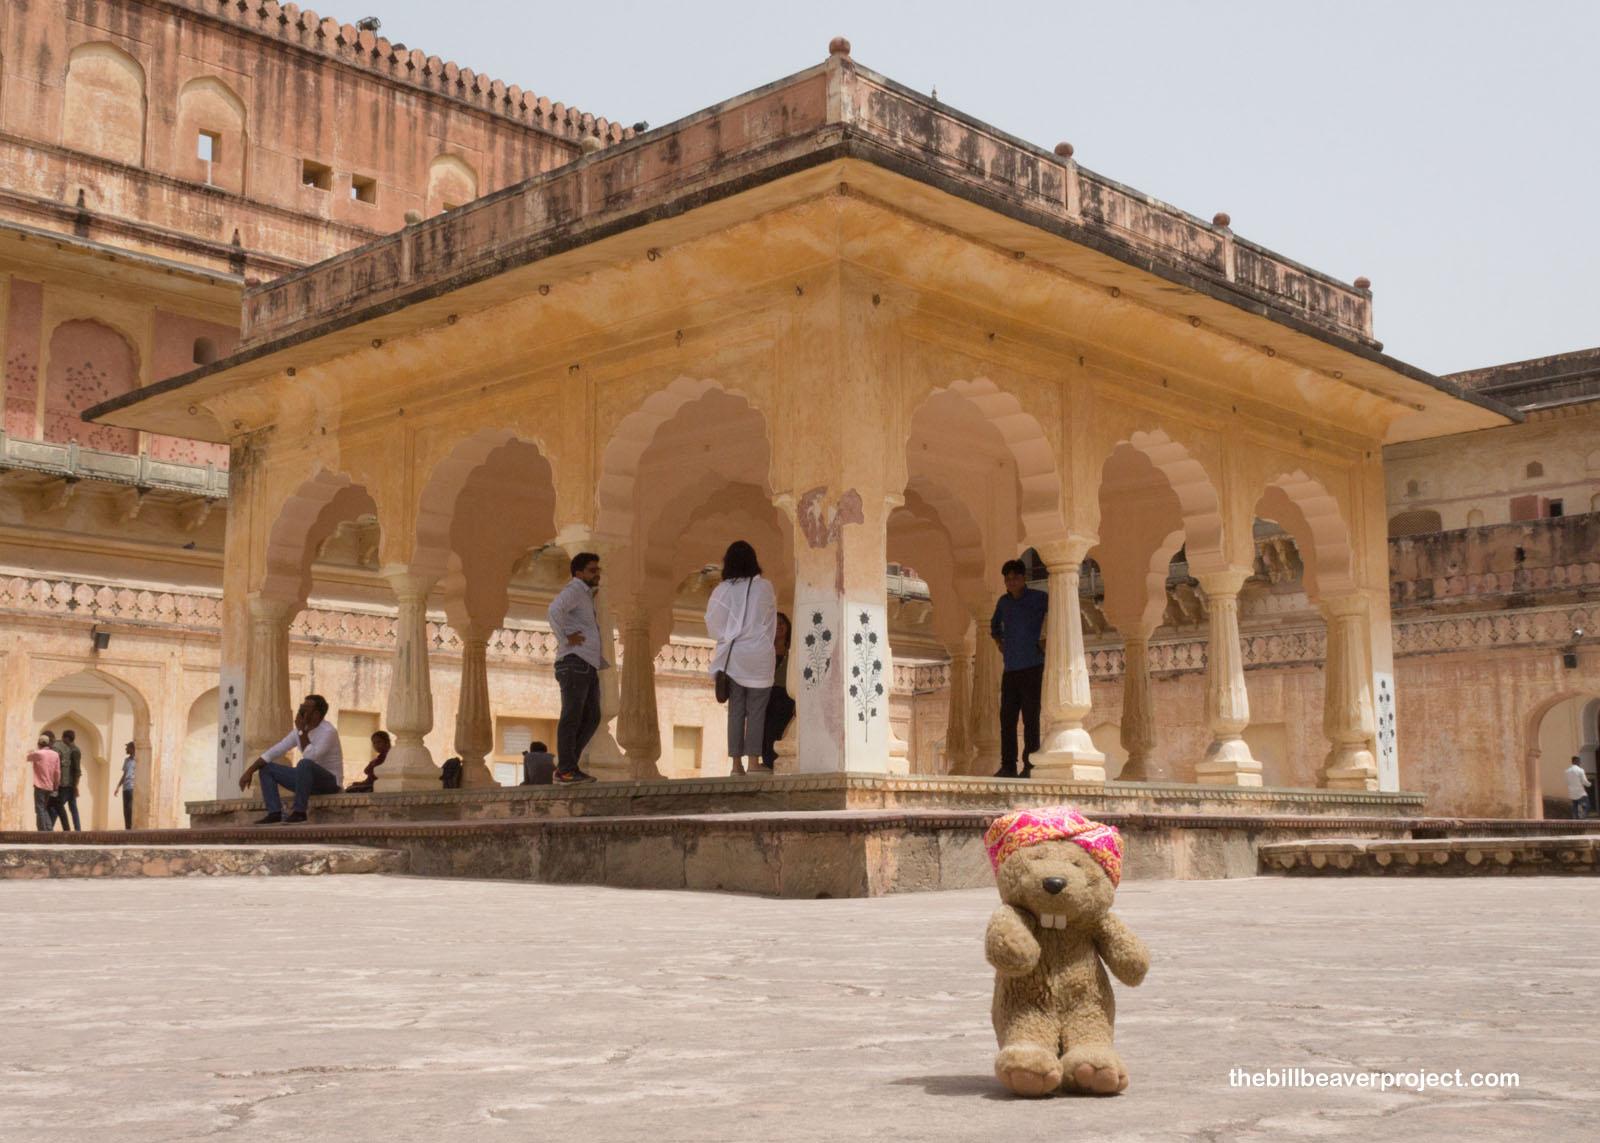 The center of the raja's harem, where the queens and concubines would meet him publicly!